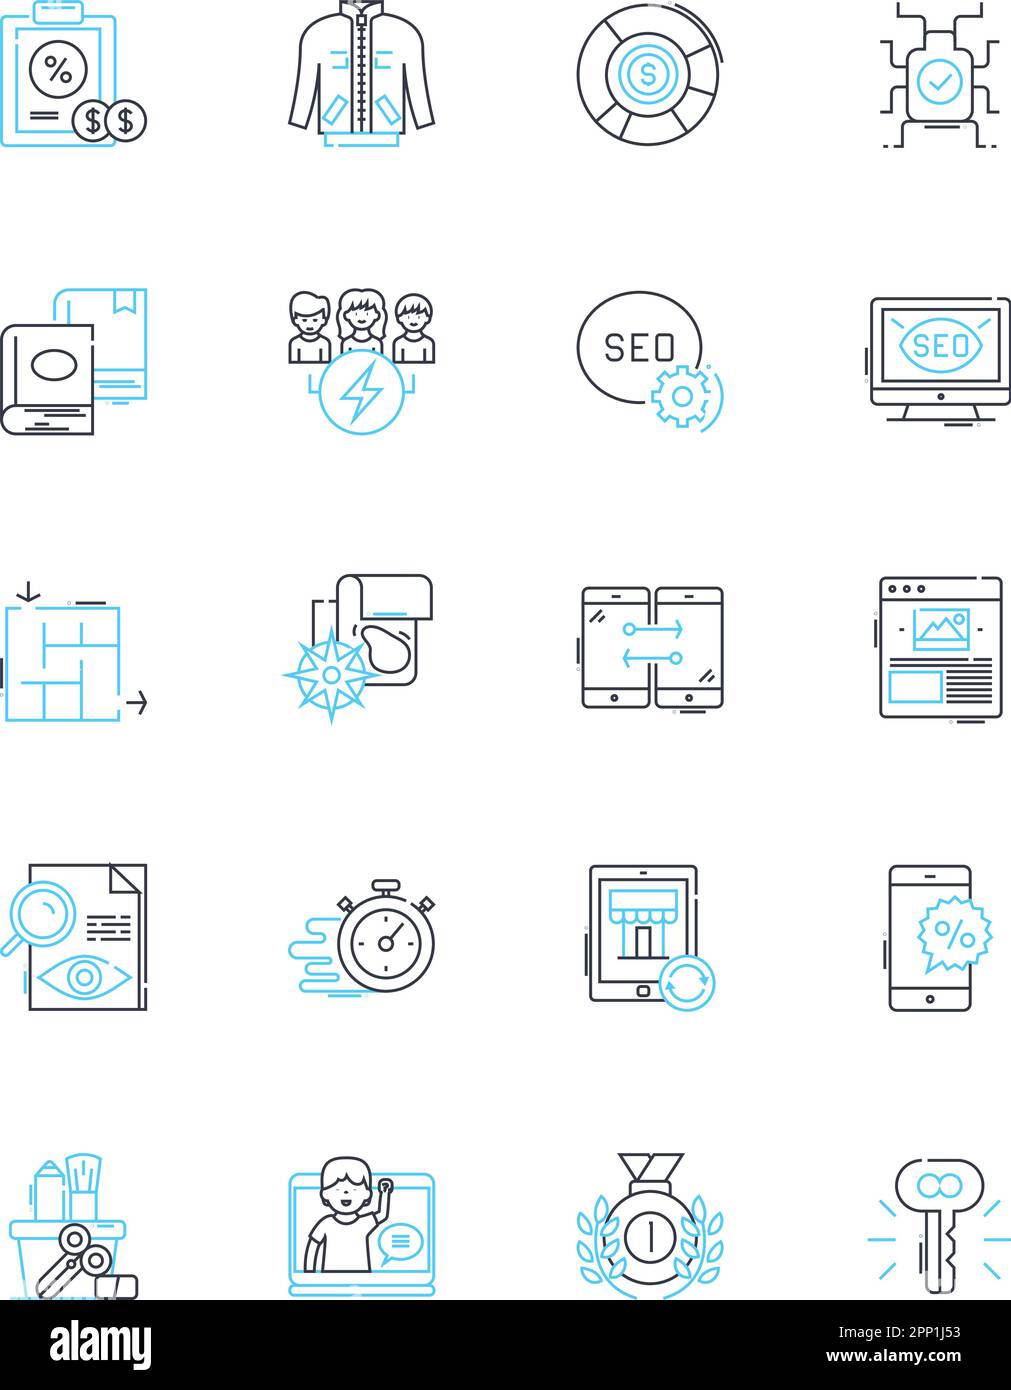 Brand perception linear icons set. Trusrthy, Authenticity, Reputation, Recognition, Loyalty, Perception, Identity line vector and concept signs Stock Vector